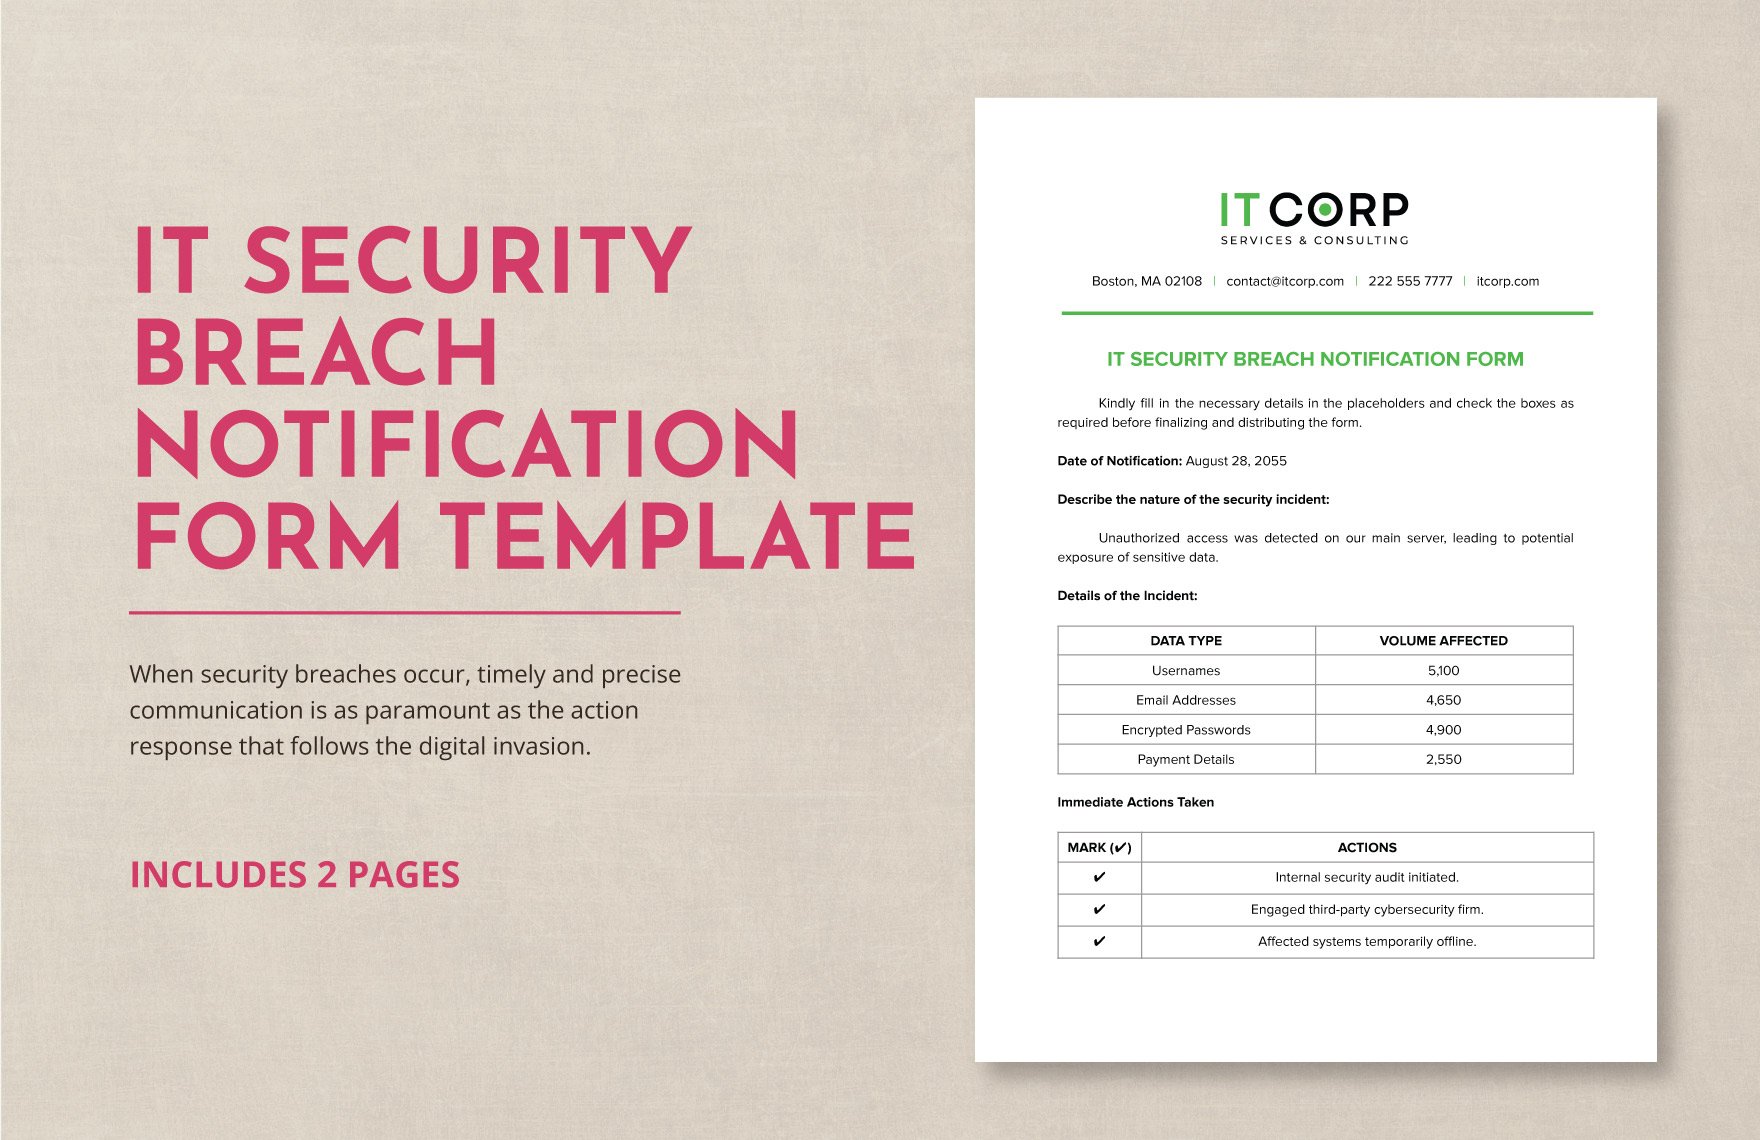 IT Security Breach Notification Form Template